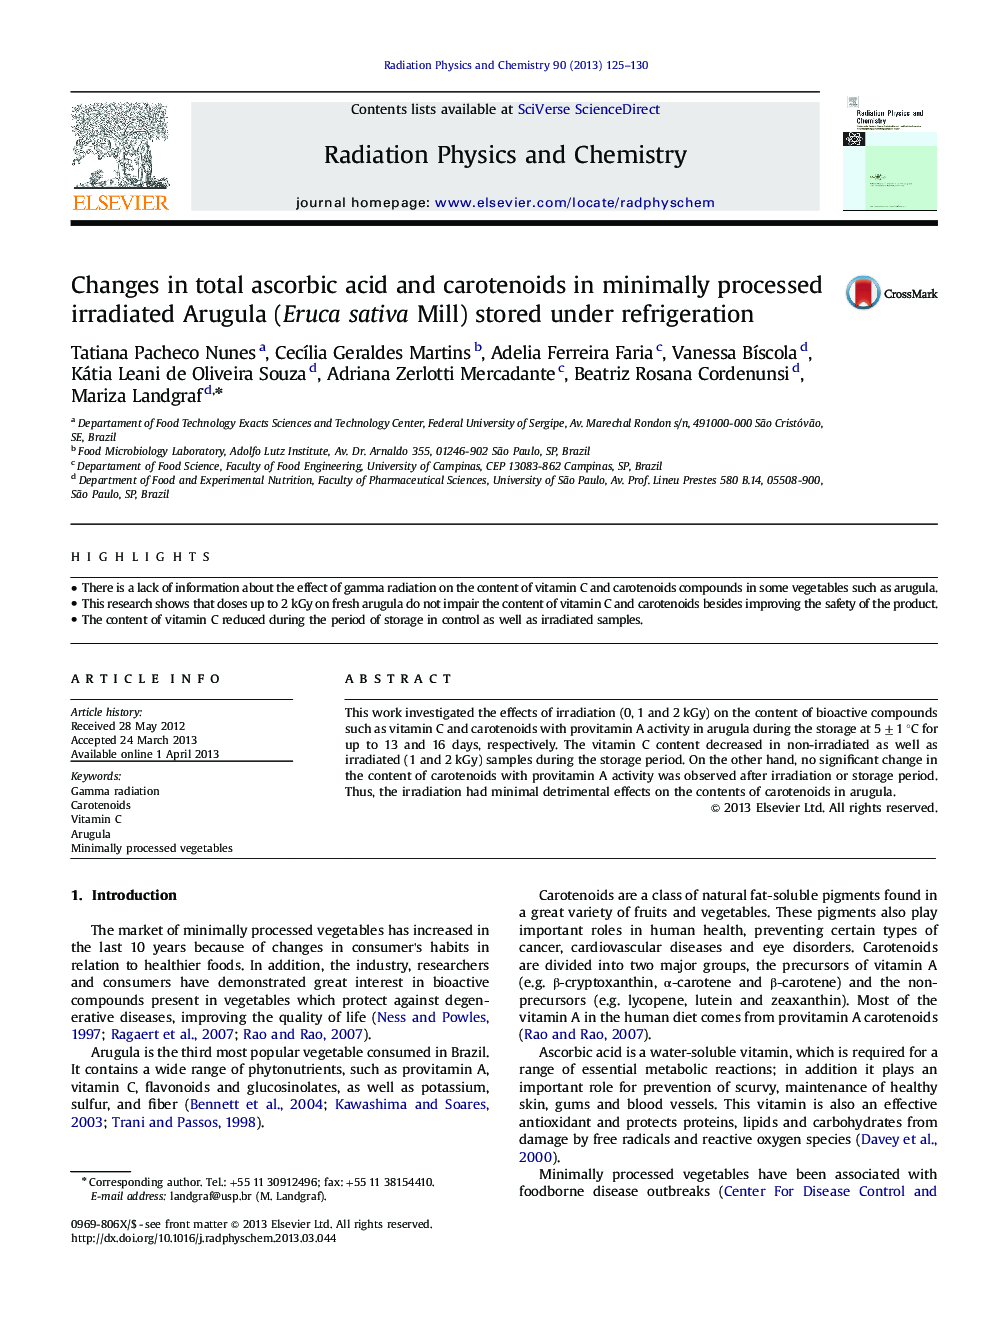 Changes in total ascorbic acid and carotenoids in minimally processed irradiated Arugula (Eruca sativa Mill) stored under refrigeration